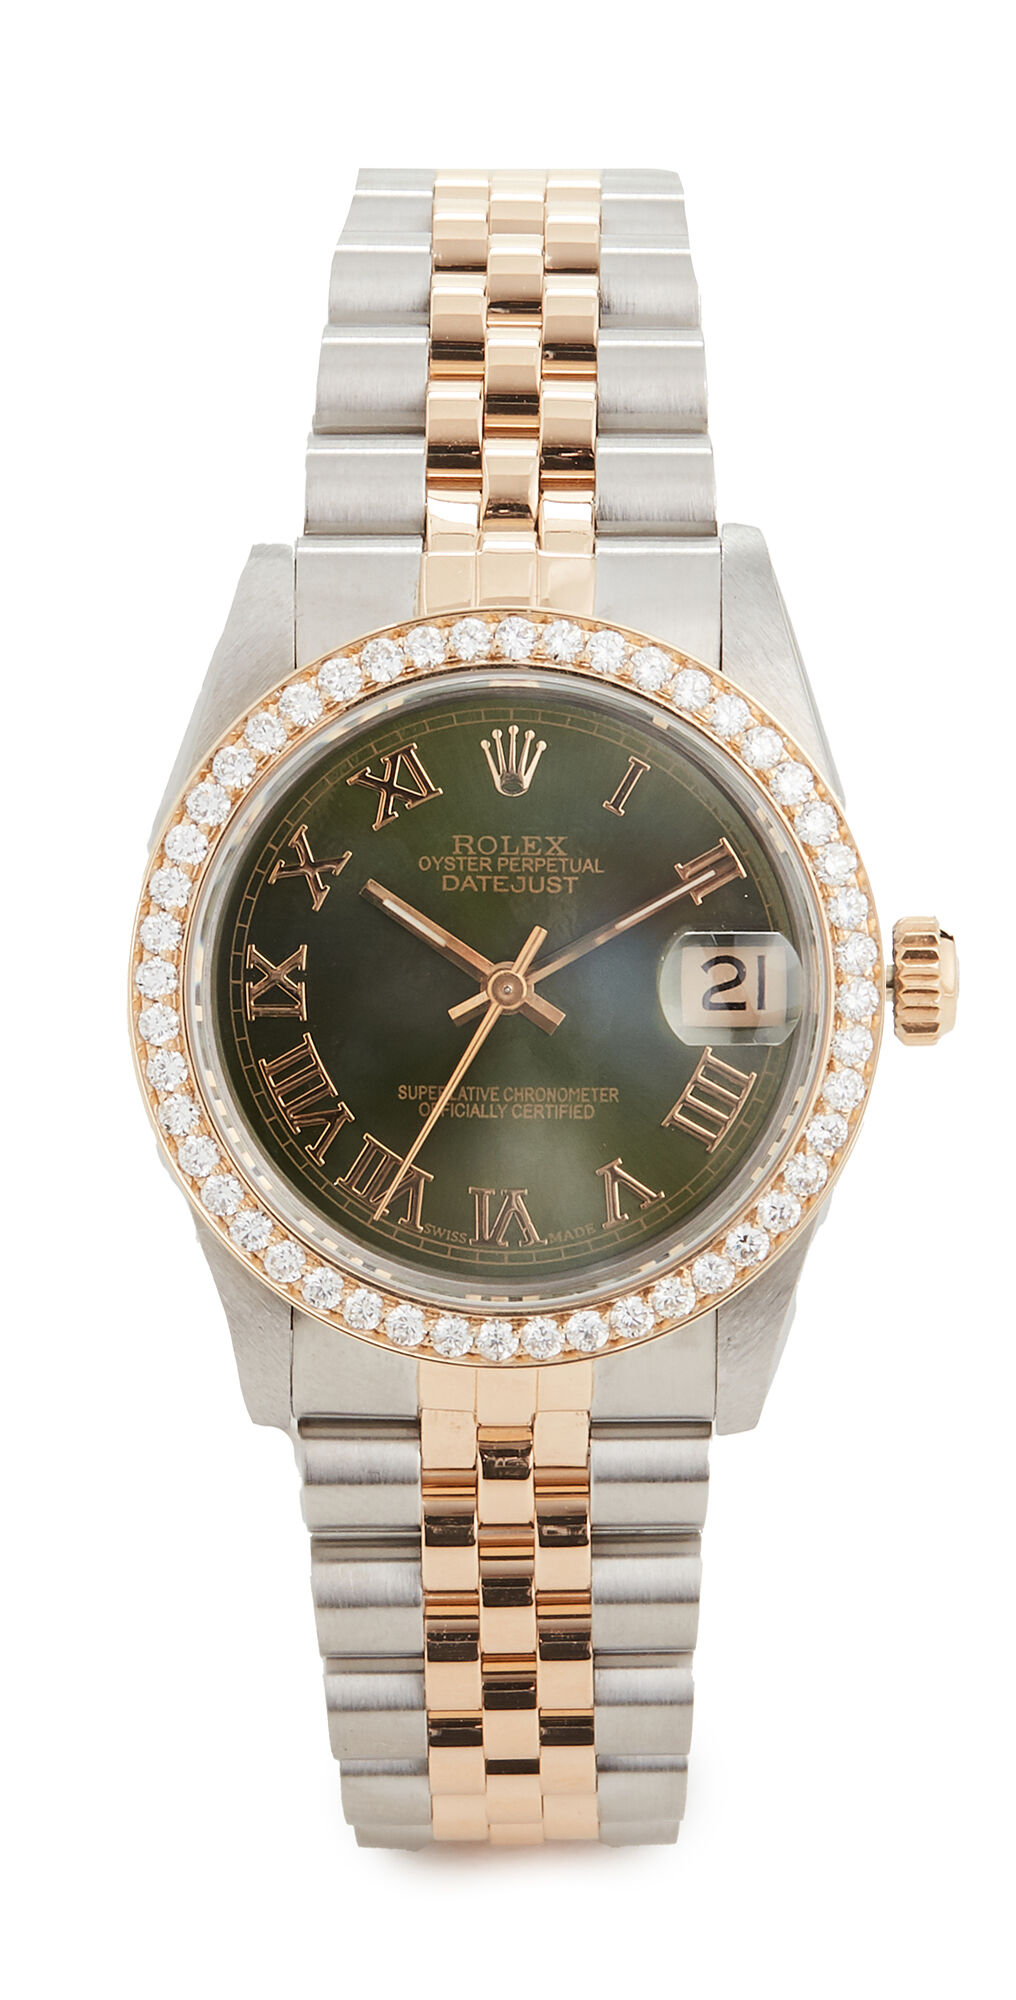 Pre-Owned Rolex Mid Size 31mm TT Rolex Date Just Olive Watch Silver/Green One Size  Silver/Green  size:One Size